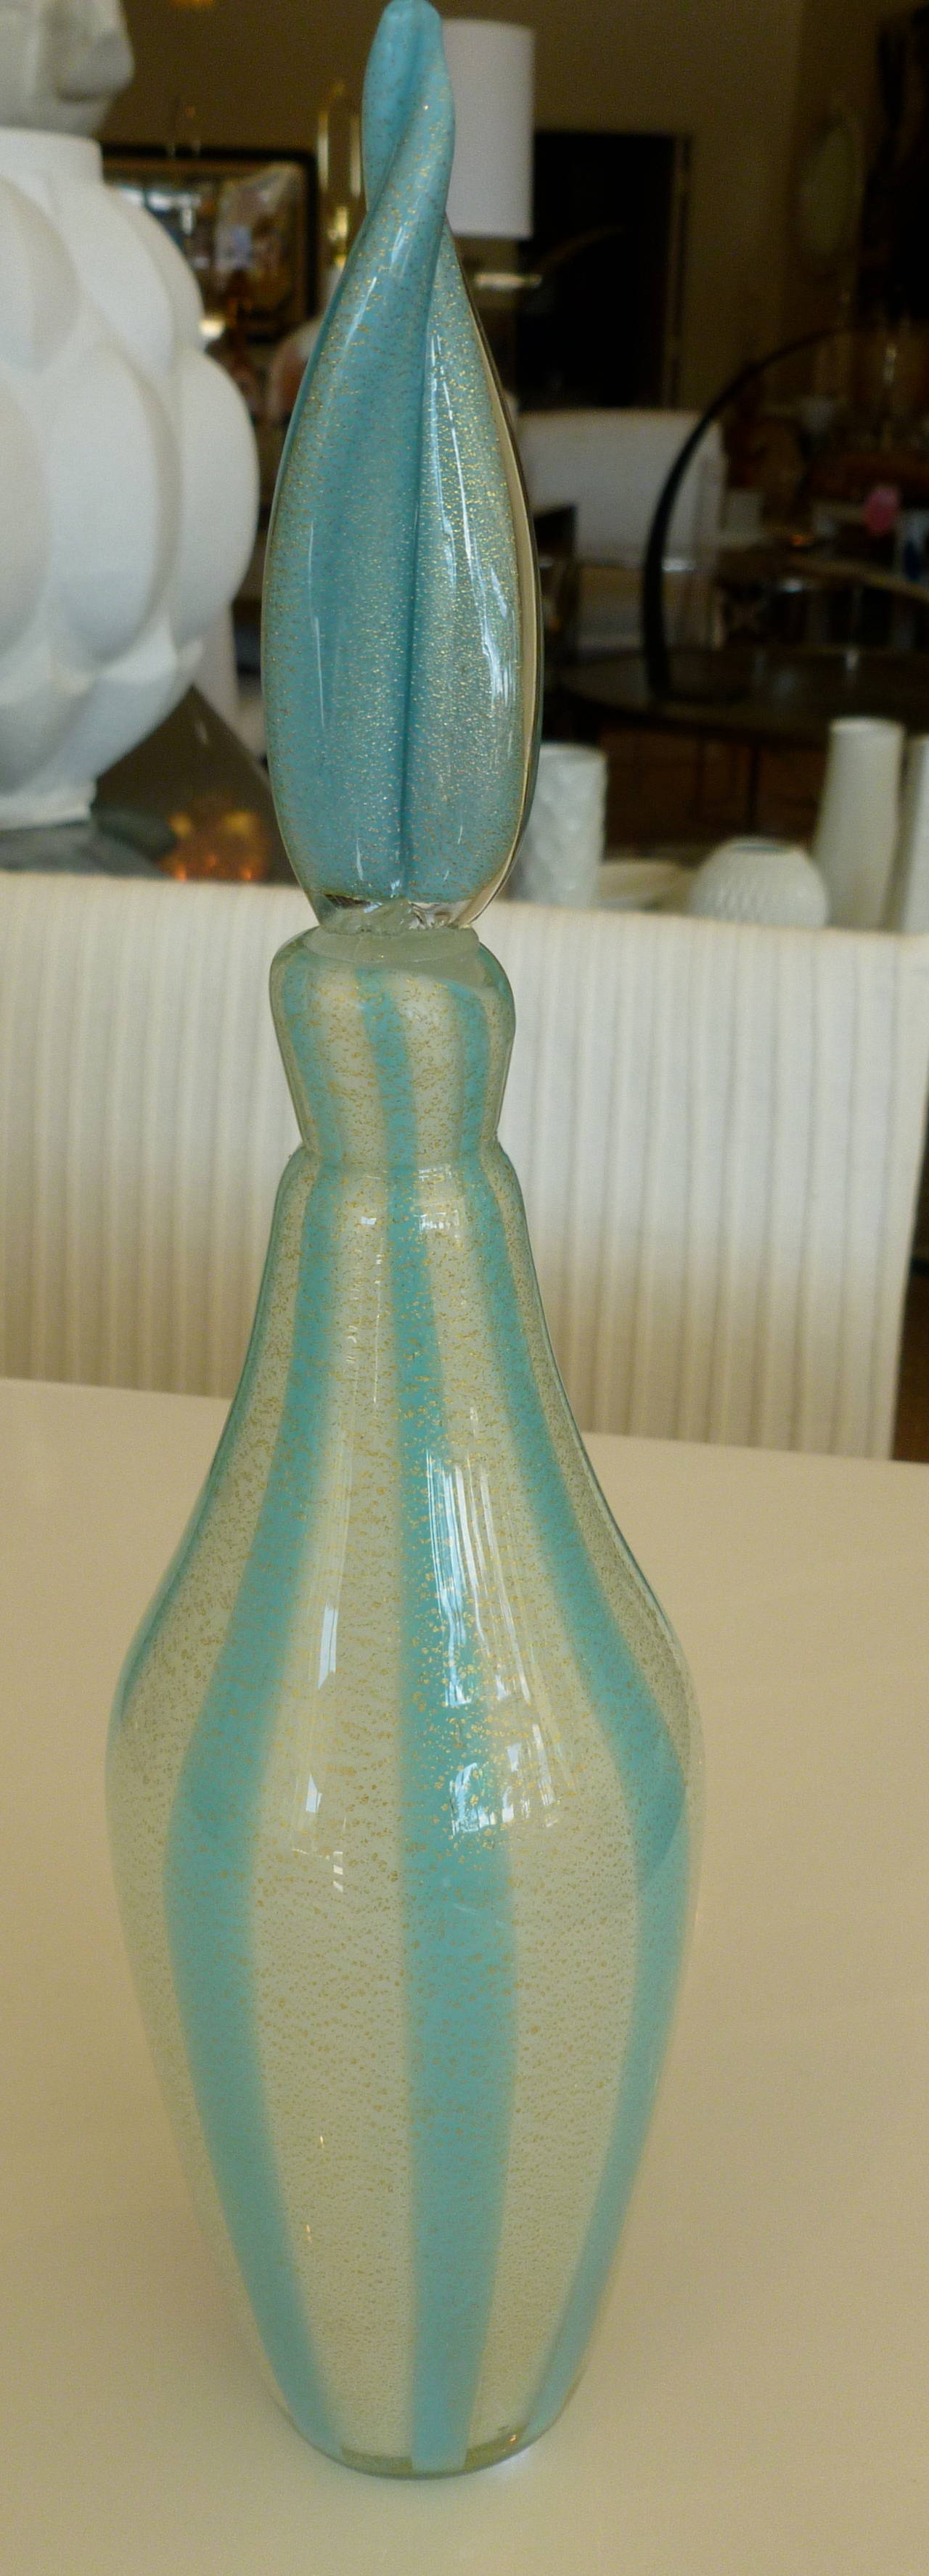 The lovely stripes of light turquoise and off-white meets gold aventurine in this beautiful Italian Murano glass bottle with original flame stopper by Italian maestro Alfredo Barbini.
It is the tent design.